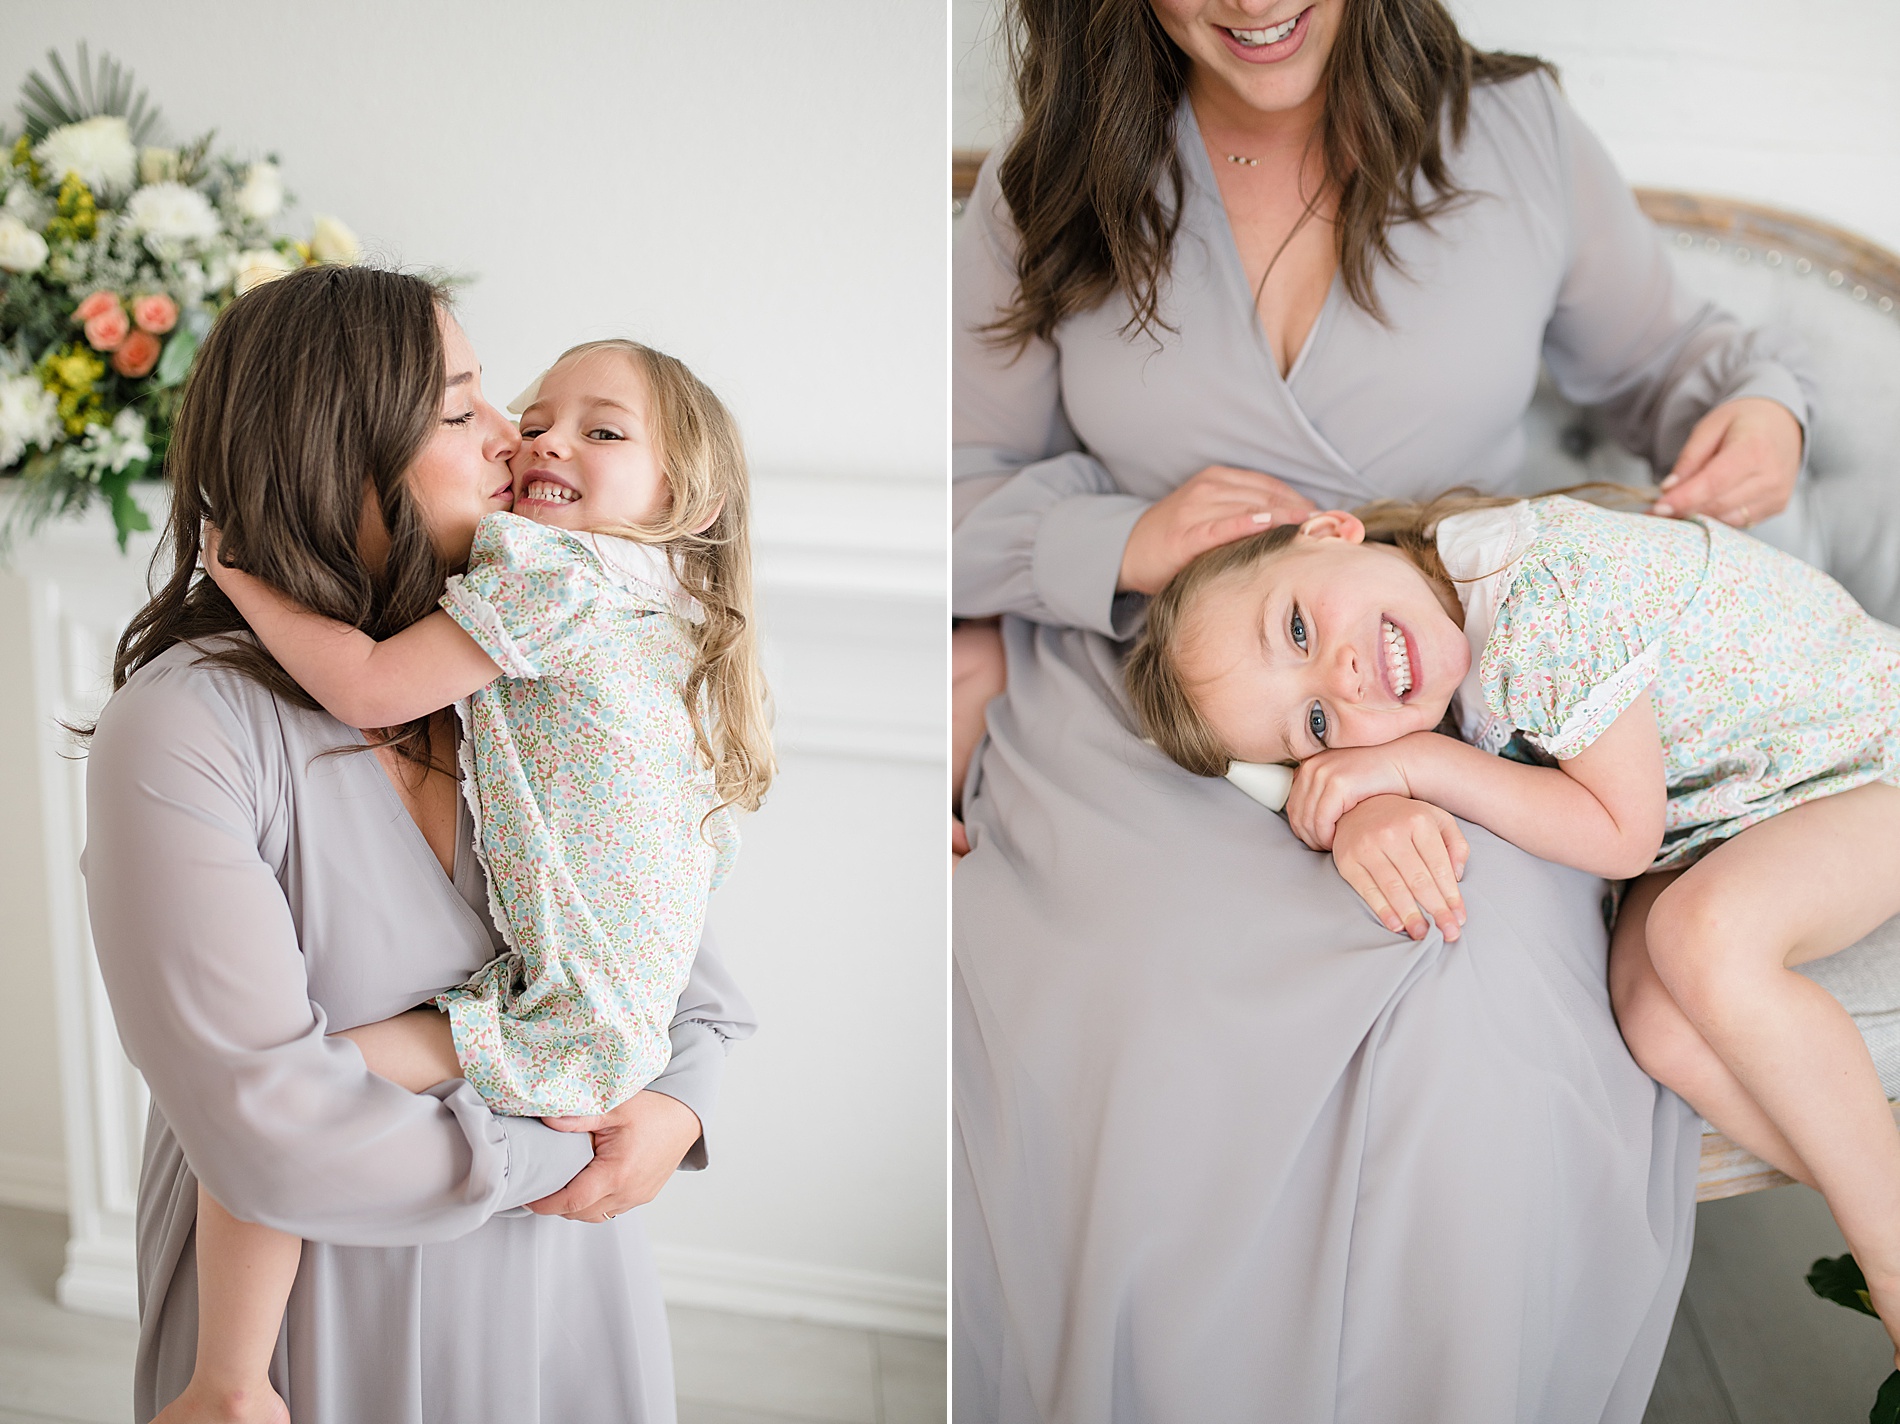 daughter lays on mom's lap during mommy and me portraits photographed by Lindsey Dutton Photography, a Dallas Newborn photographer